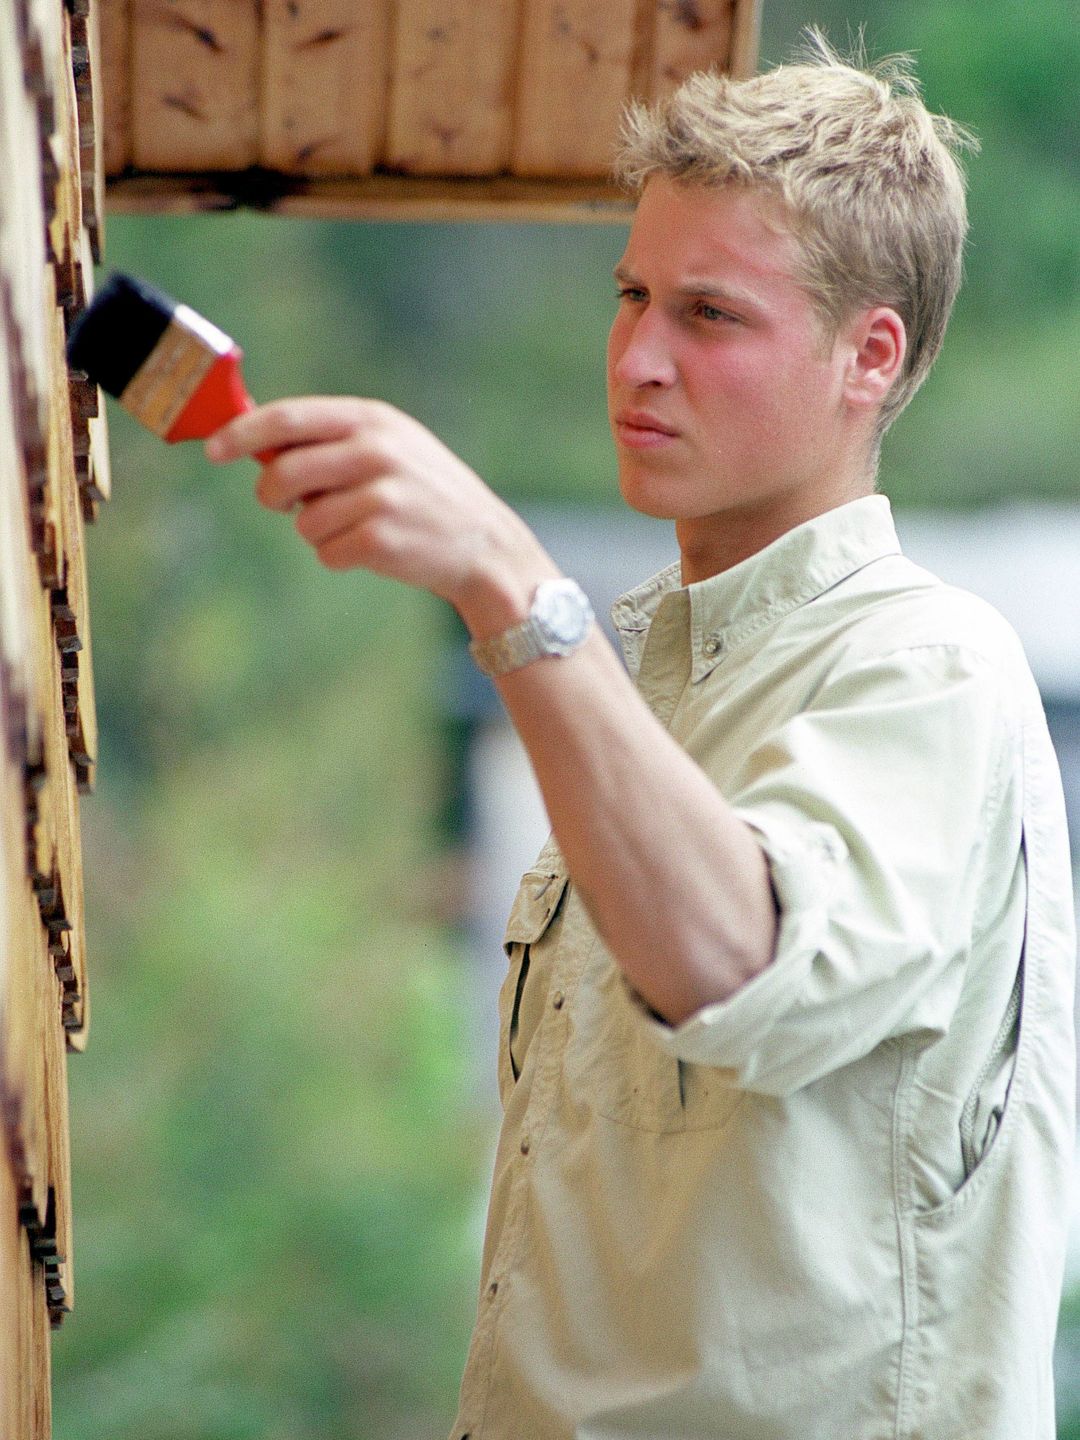 Prince William painting a house